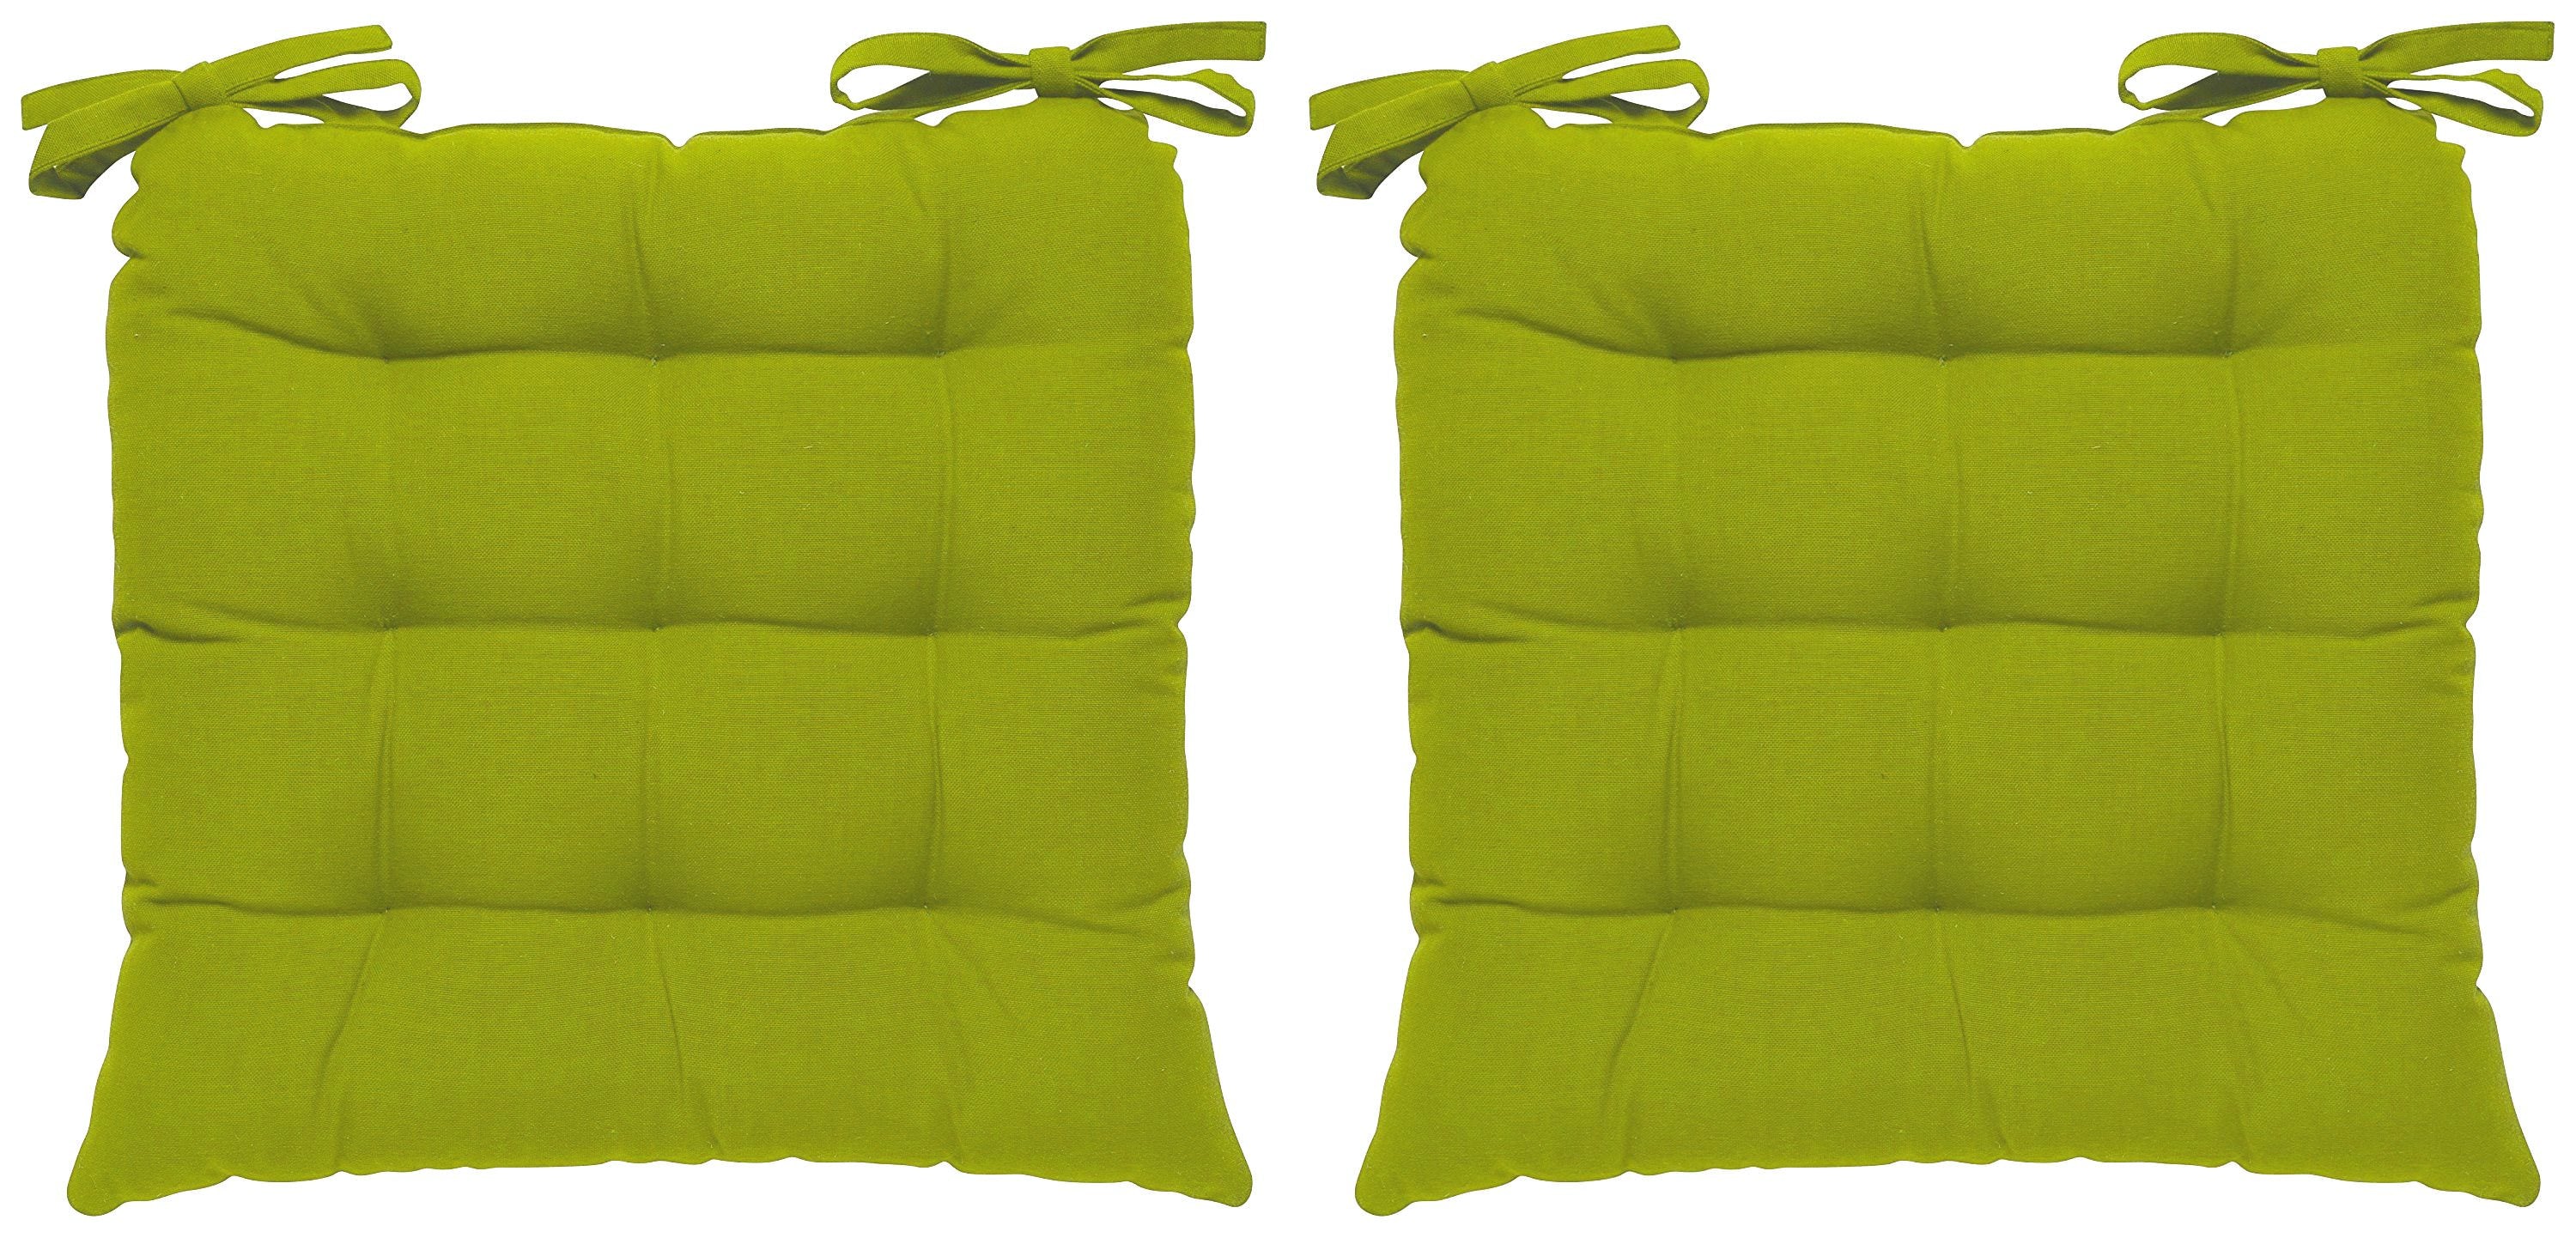 Encasa Homes Chairpad 40x40cm (2pc pack) - Dyed Cotton Canvas Filled Cushion - Lime Green